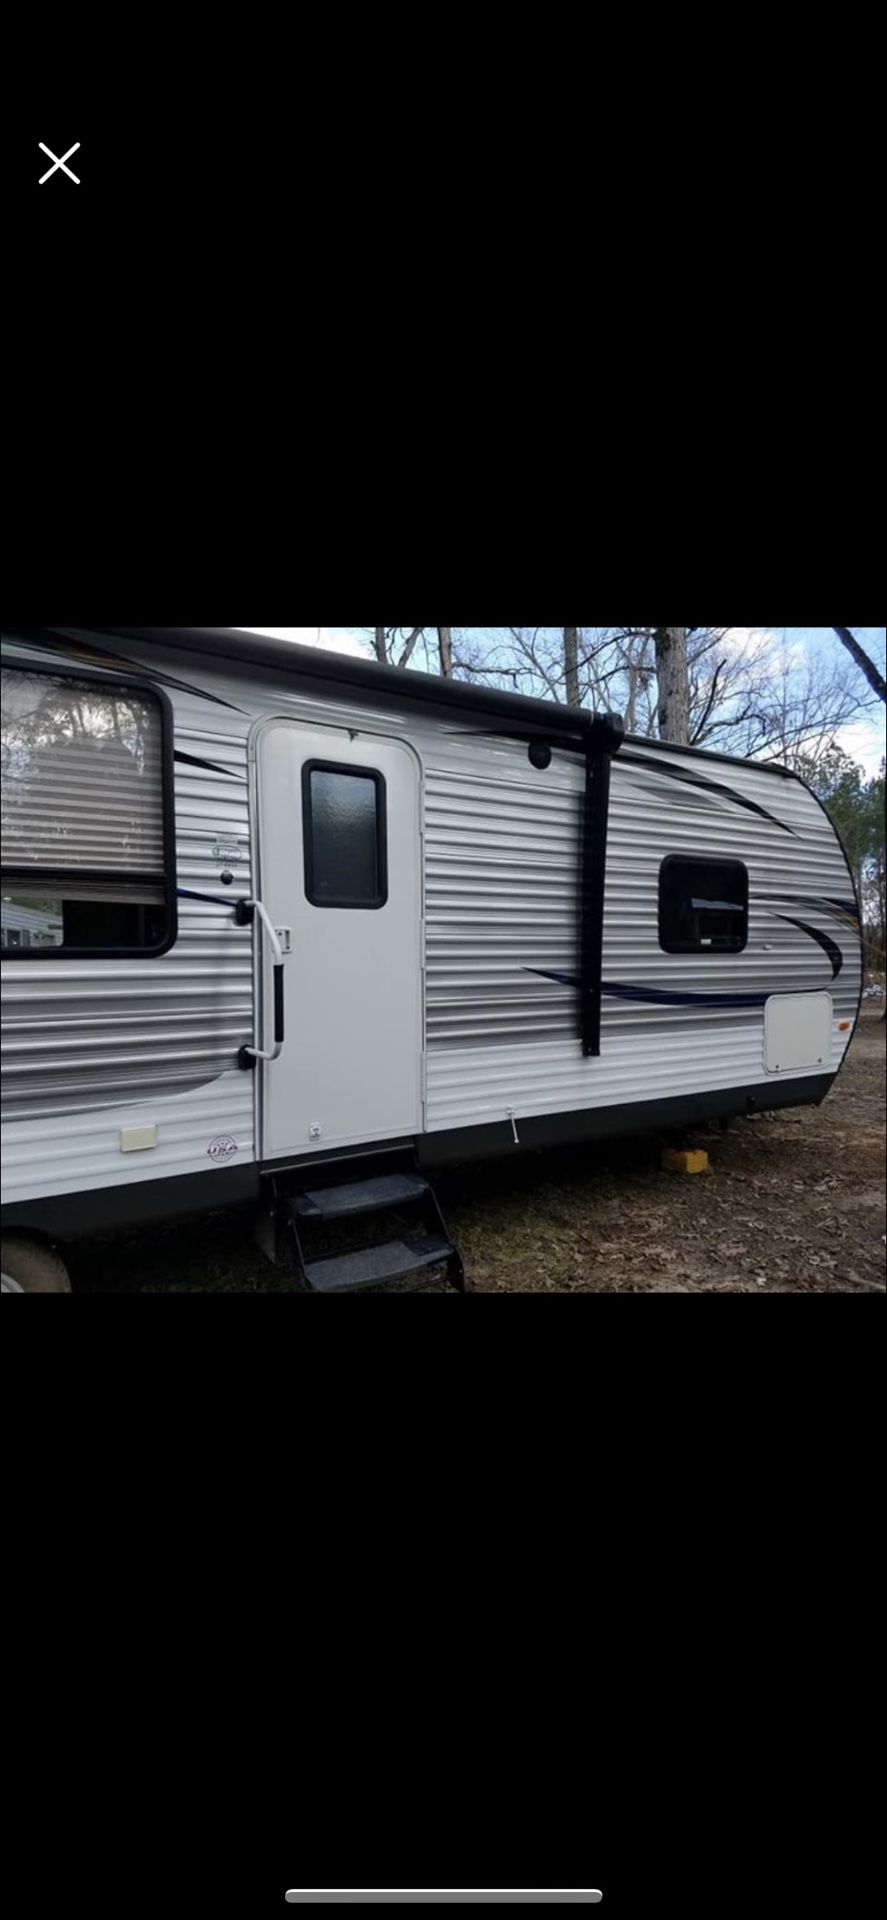 2016 Salem RV for sale only serious people low ballers will be ignored 10,500 any questions